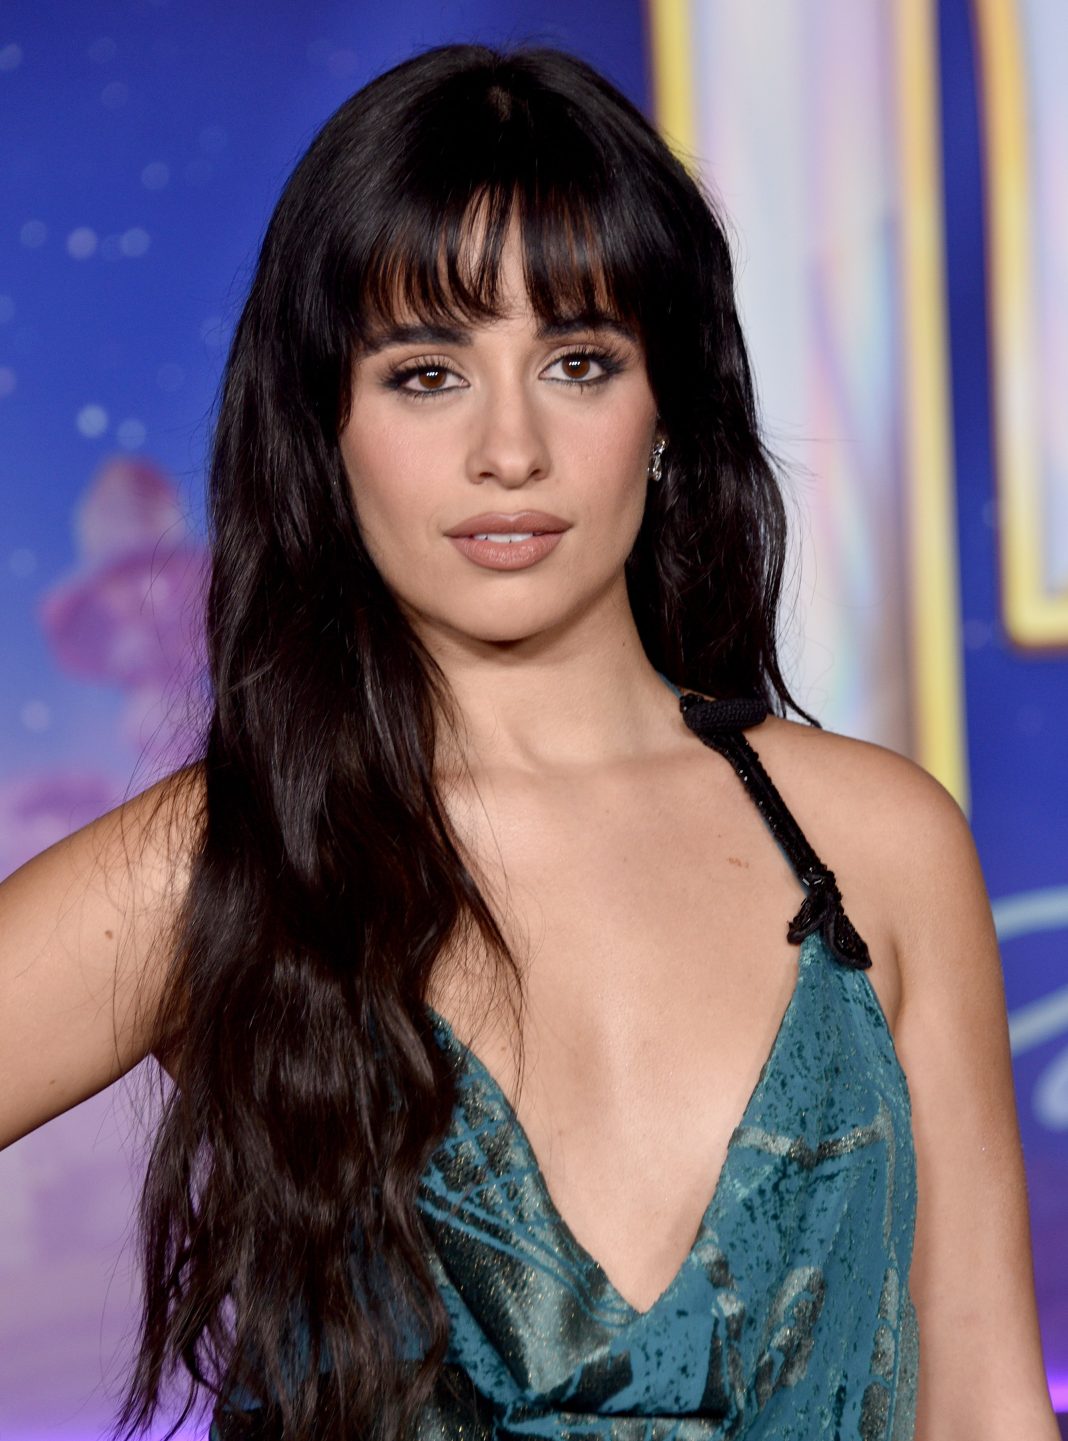 one-set-of-“bitchy-hot-girl-alien-french-nails”-like-camila-cabello’s,-please-—-see-photos